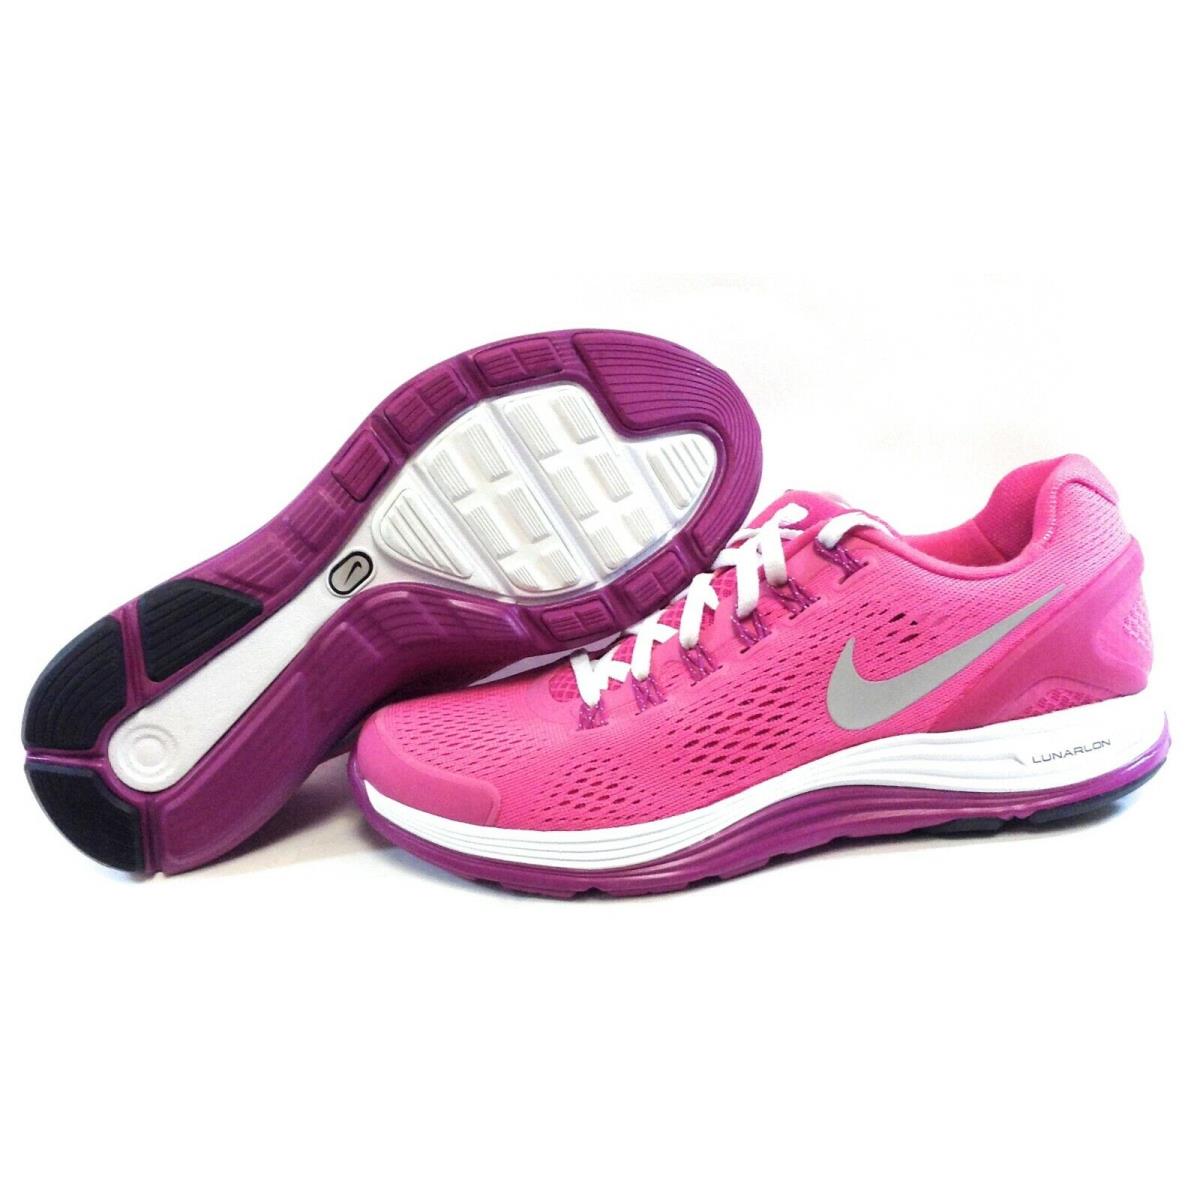 Girls Kids Youth Nike Lunarglide 4 525371 600 Desert Pink 2012 DS Sneakers Shoes